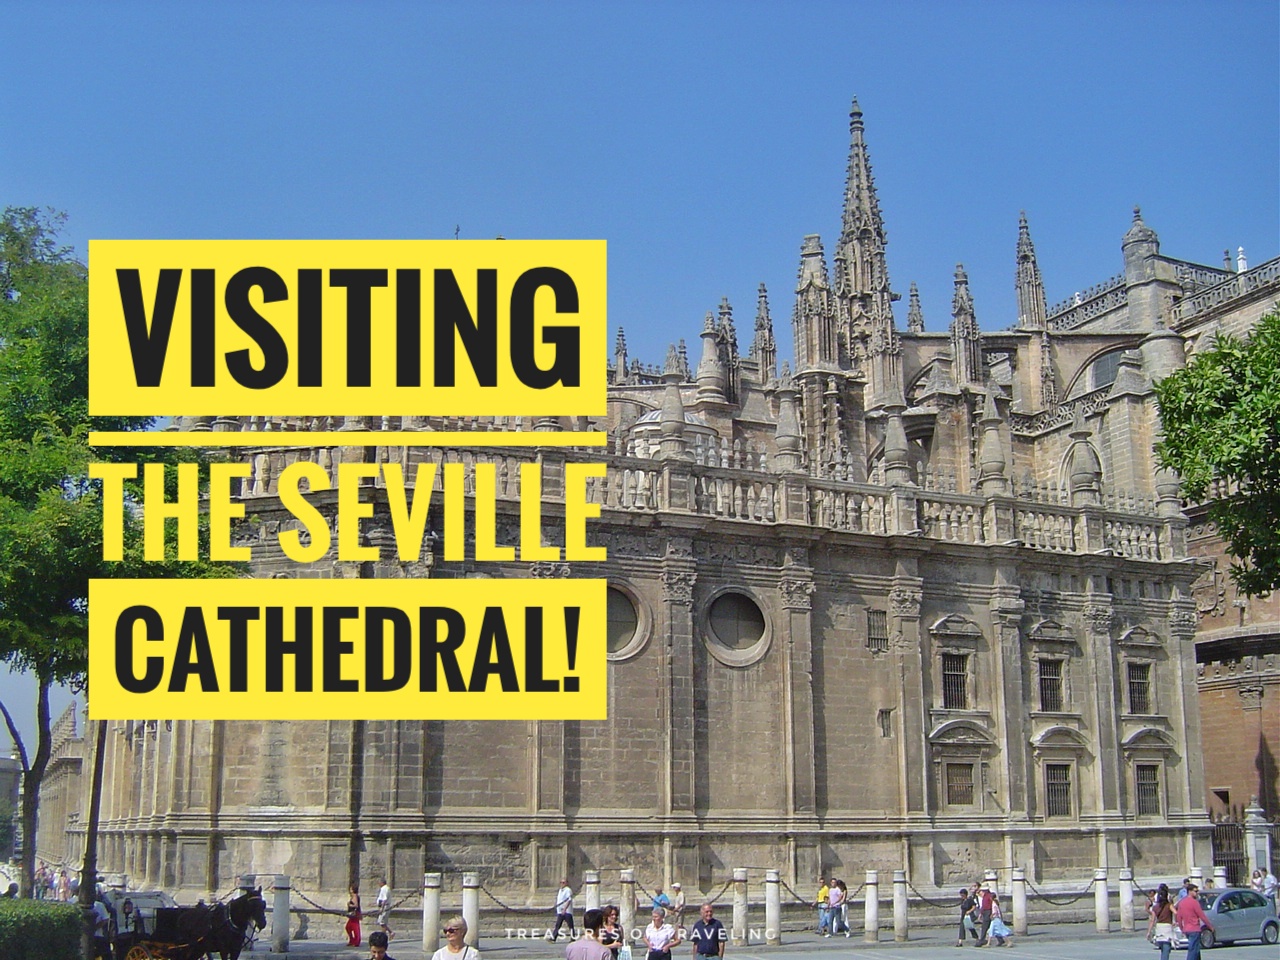 Seville Cathedral was registered in 1987 by UNESCO as a World Heritage Site. Find out the reasons it is historical, along with other interesting facts that make this one of the treasures of traveling in southern Spain.